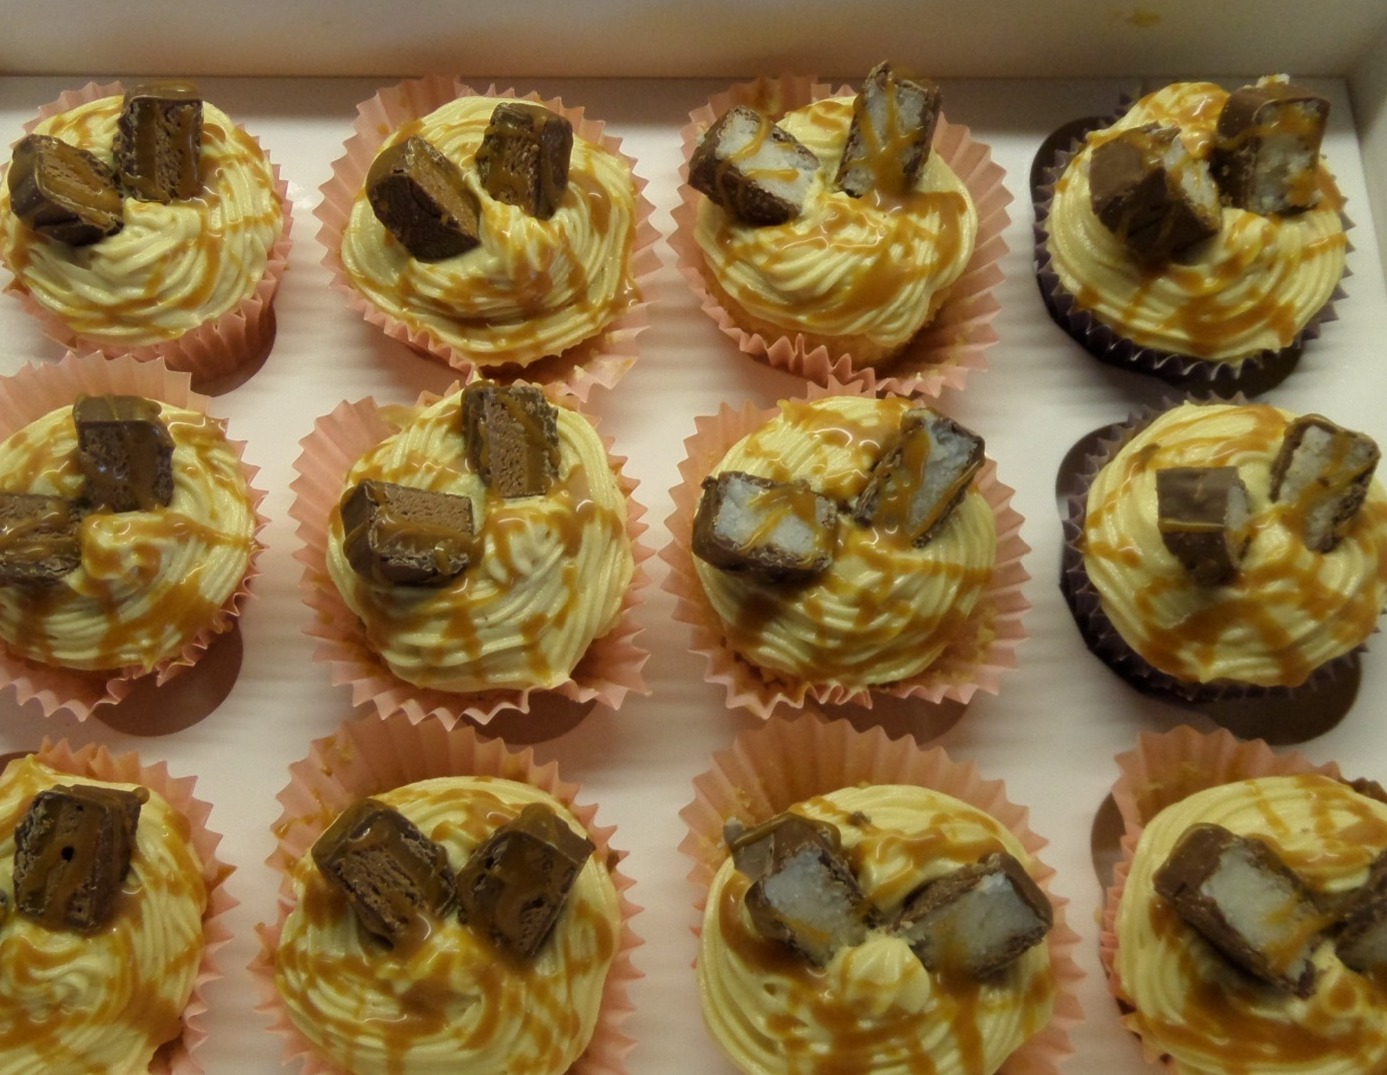 mars bar and bounty topped cupcakes